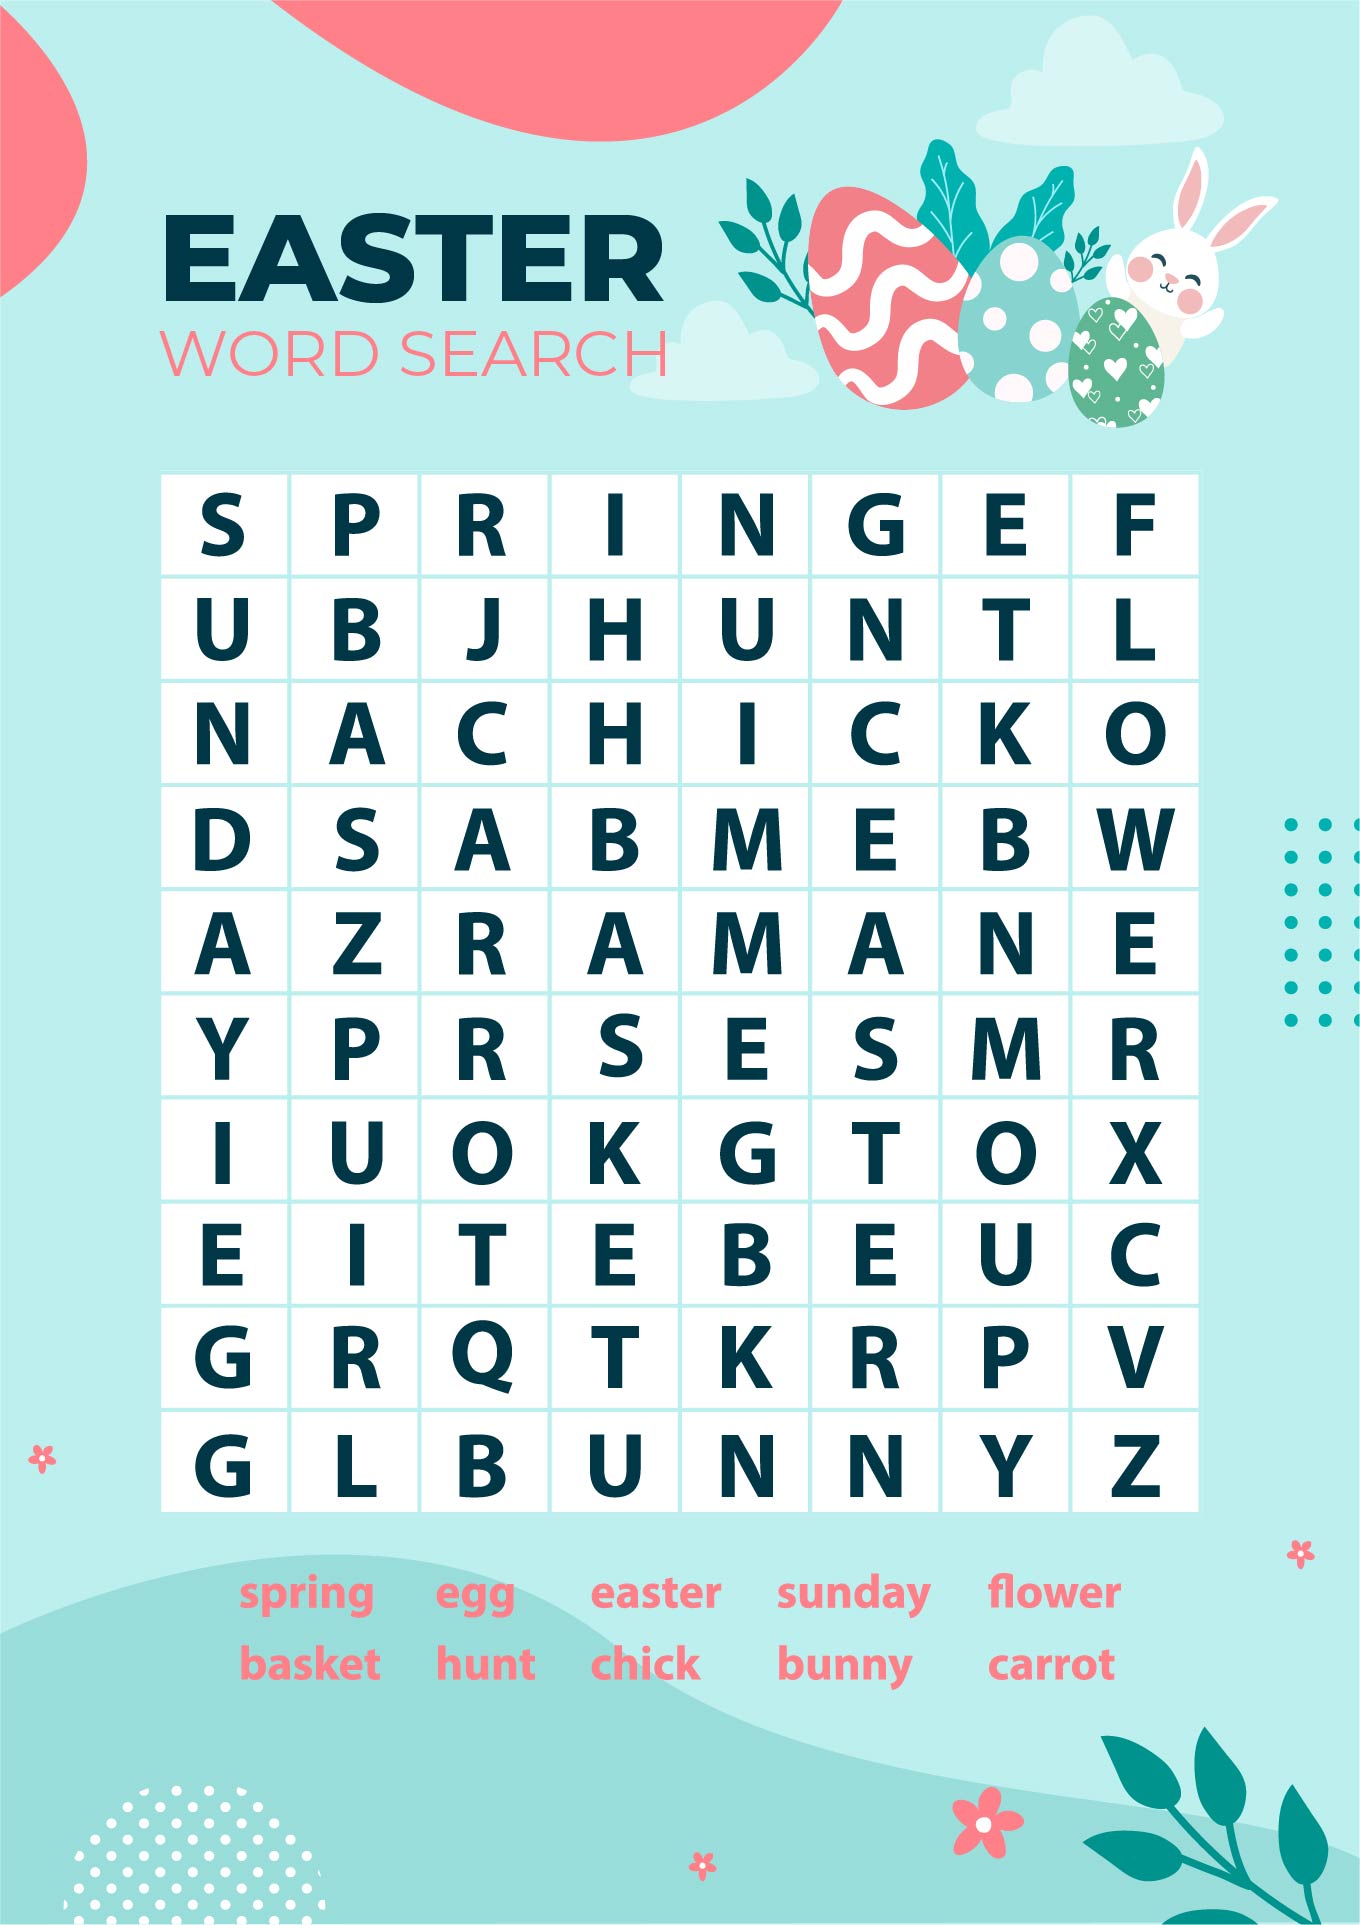 Easter Word Search Puzzle